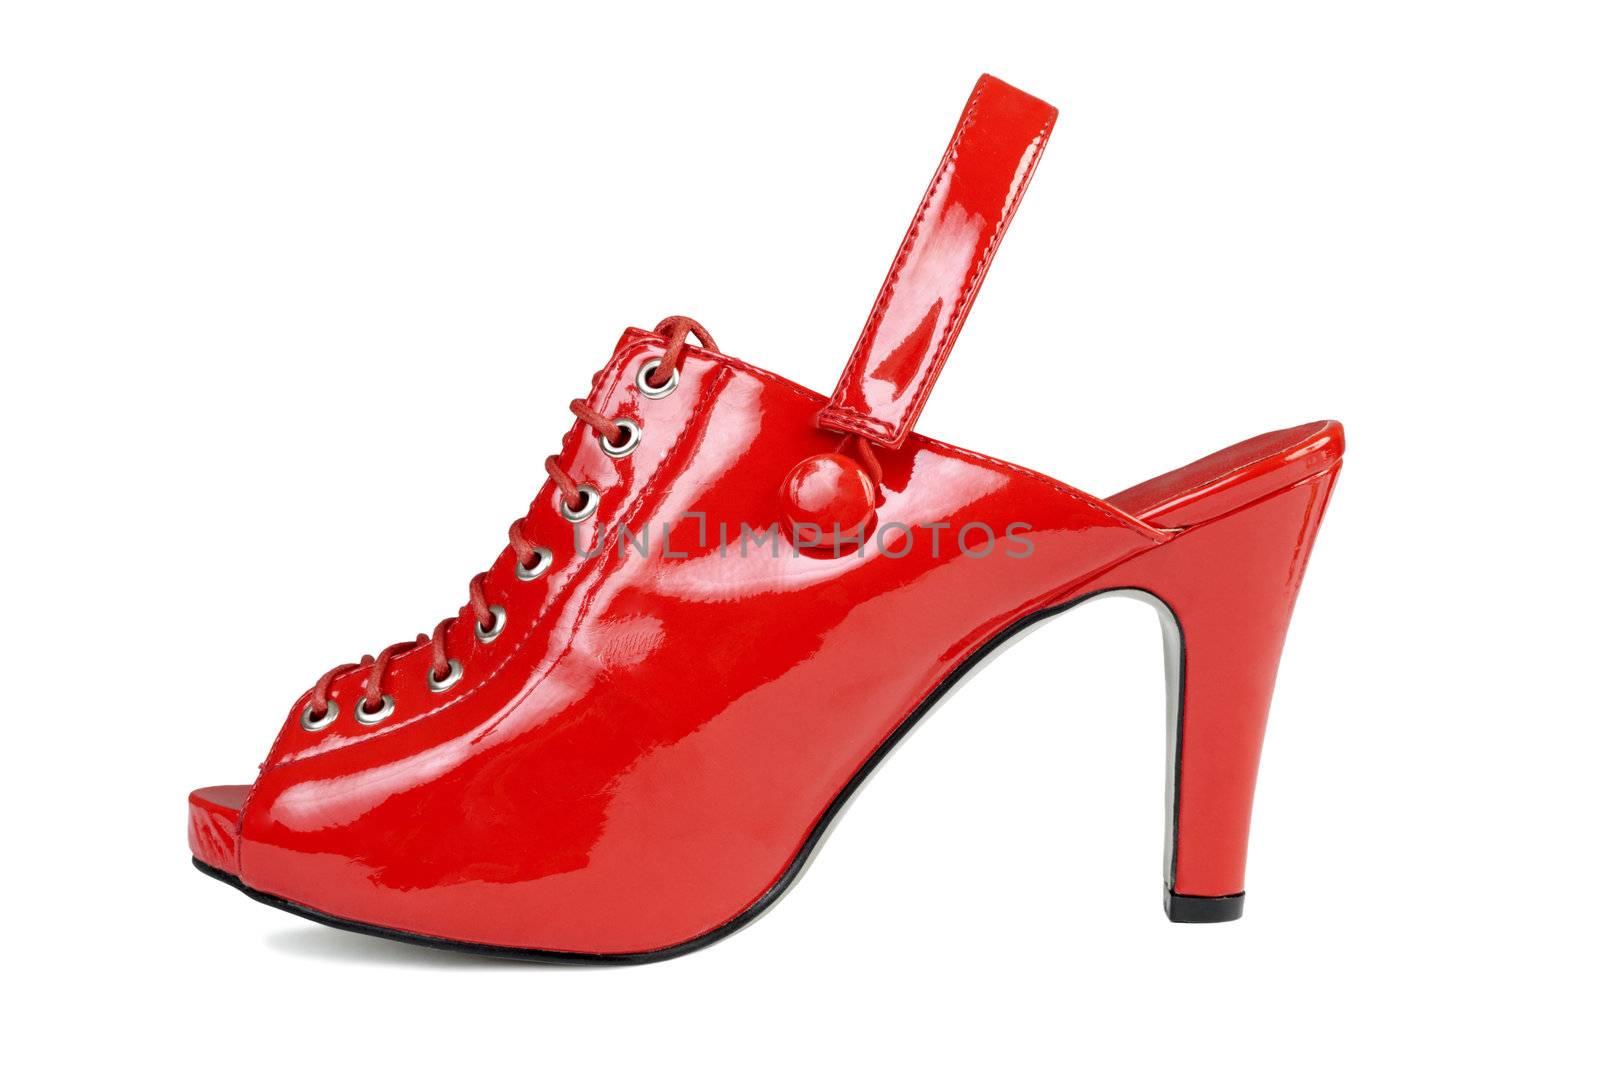 Red sexy female shoe on high heel. Isolated on white background